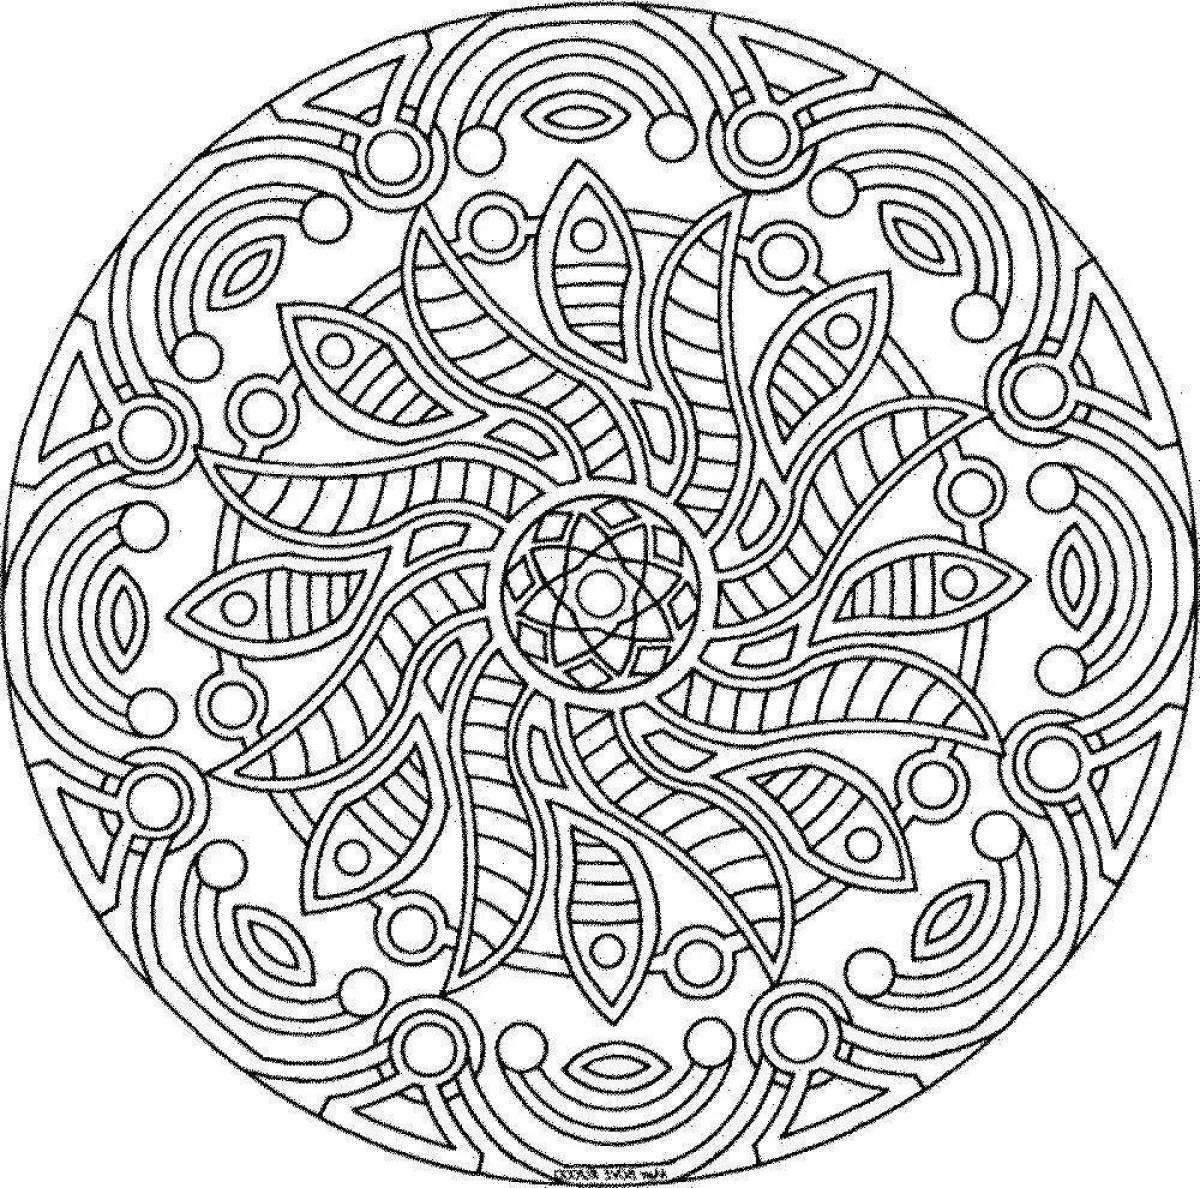 Stimulated psychological anti-stress coloring book